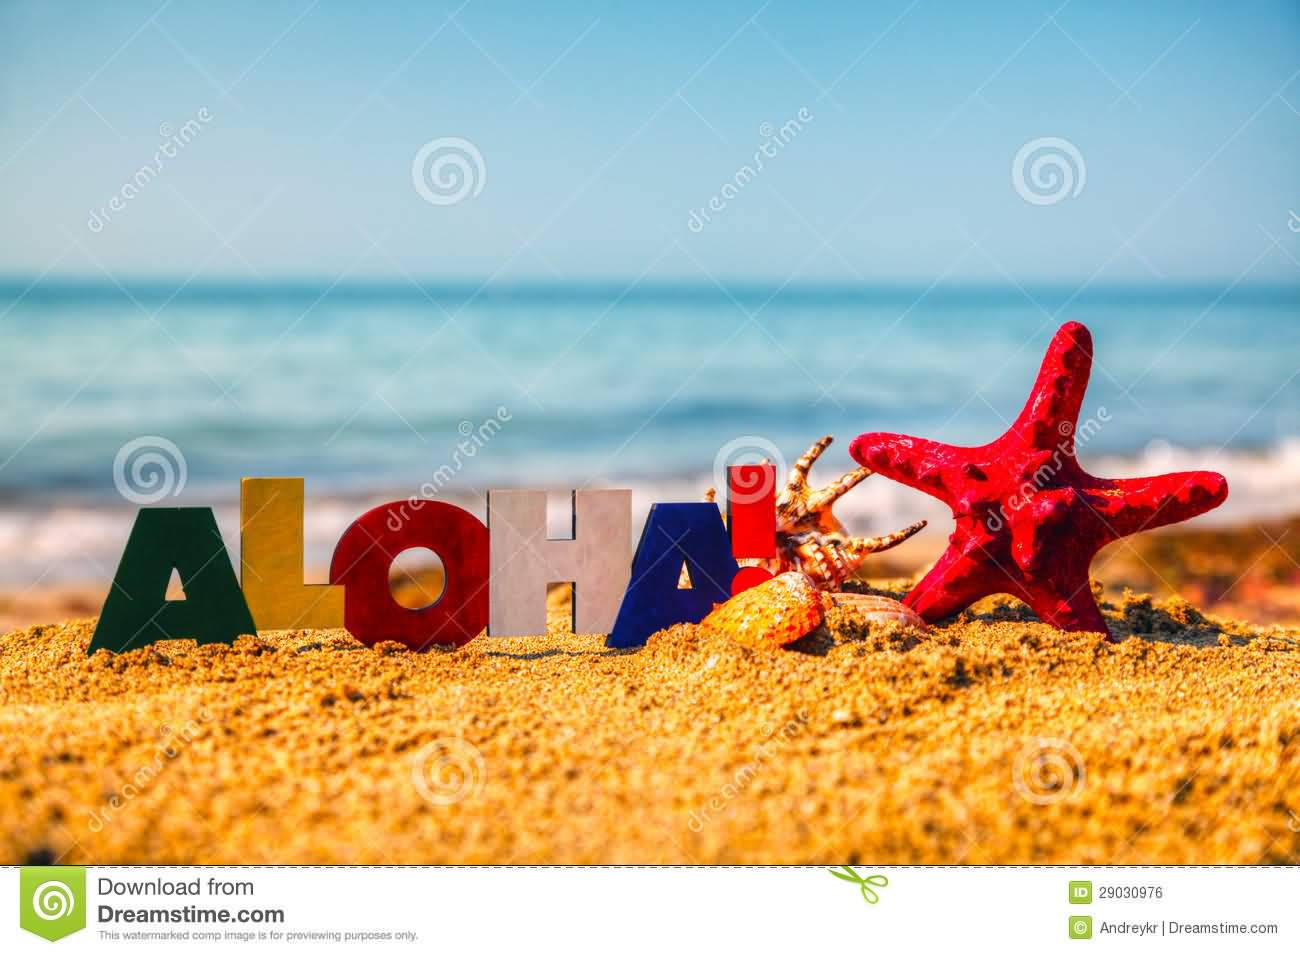 Aloha Wooden Colorful Text With Star Fish On Beach Sand Picture